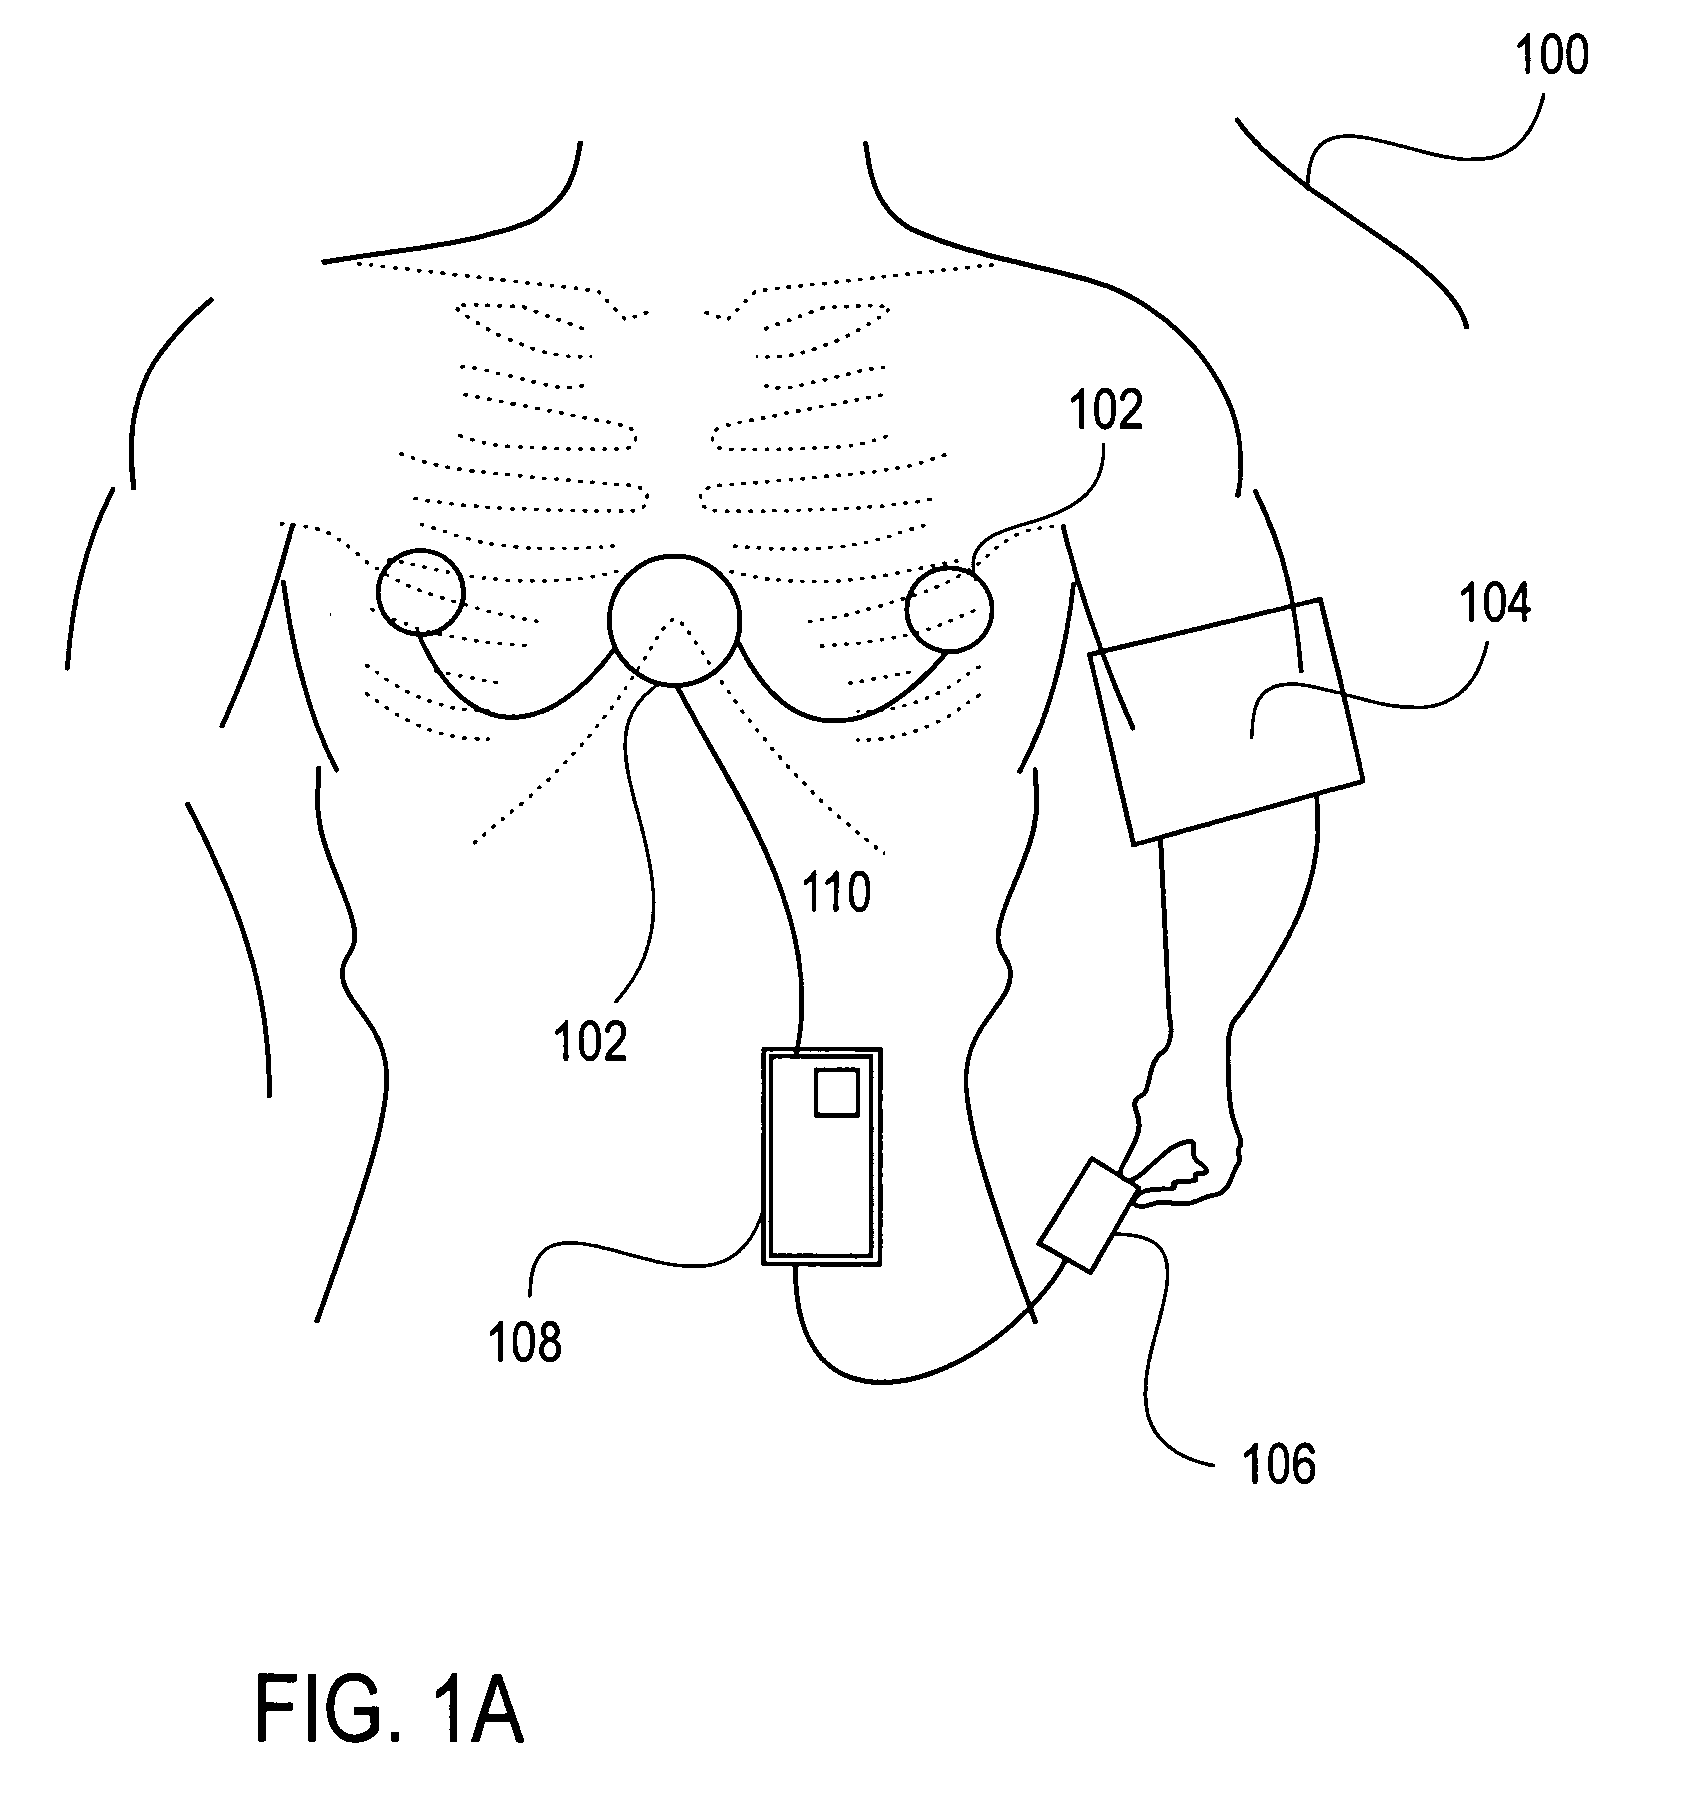 Communication terminal, medical telemetry system and method for monitoring physiological data